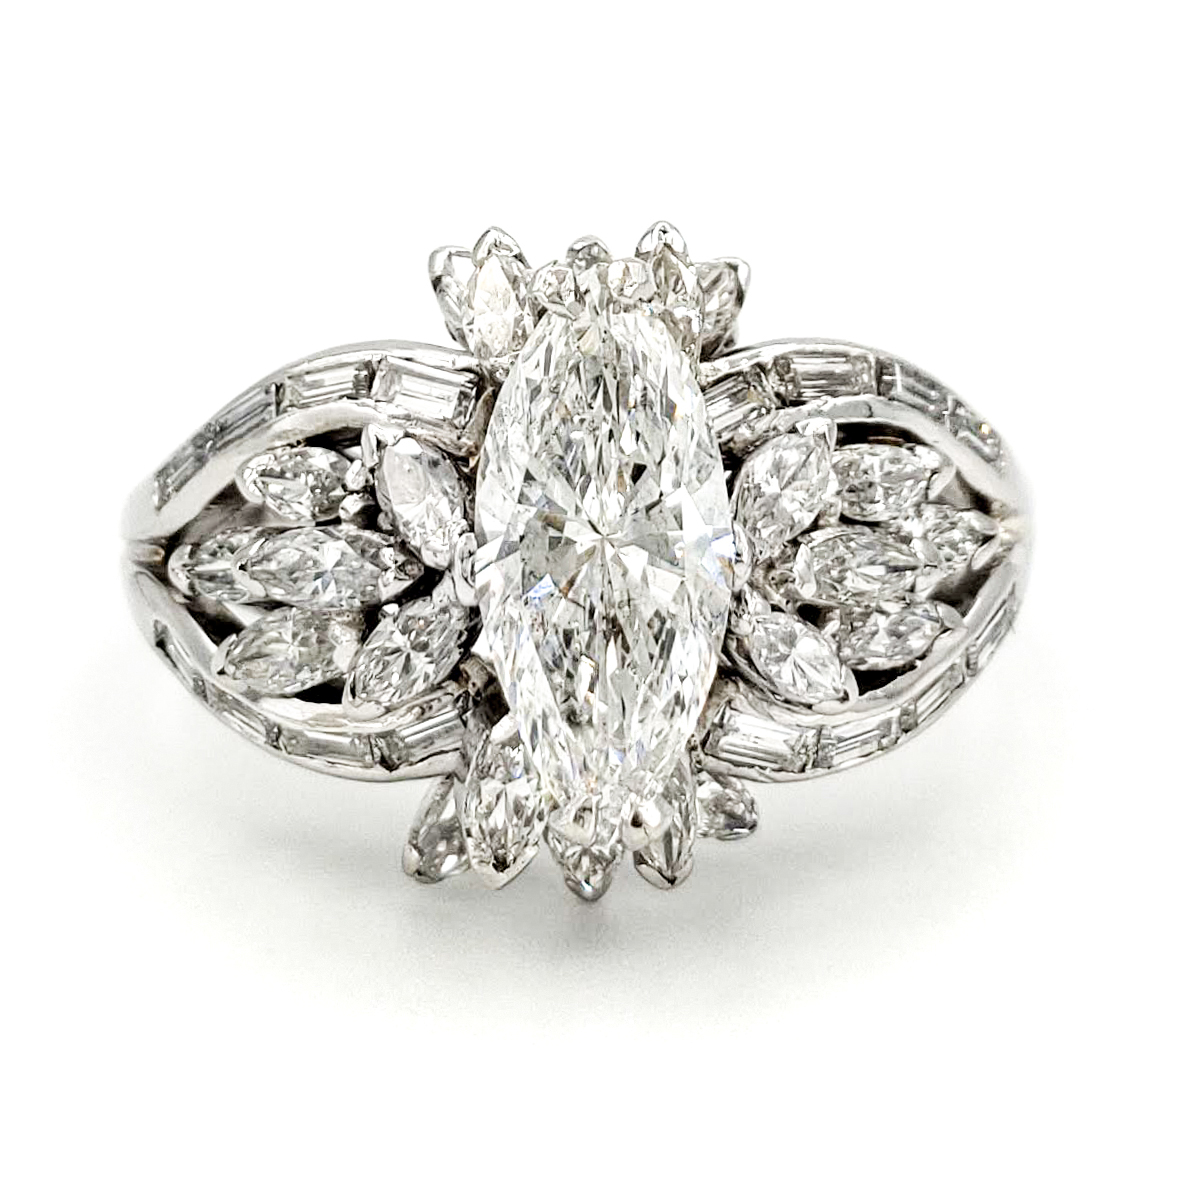 vintage-platinum-engagement-ring-with-0-89-carat-marquise-cut-diamond-gia-e-si1